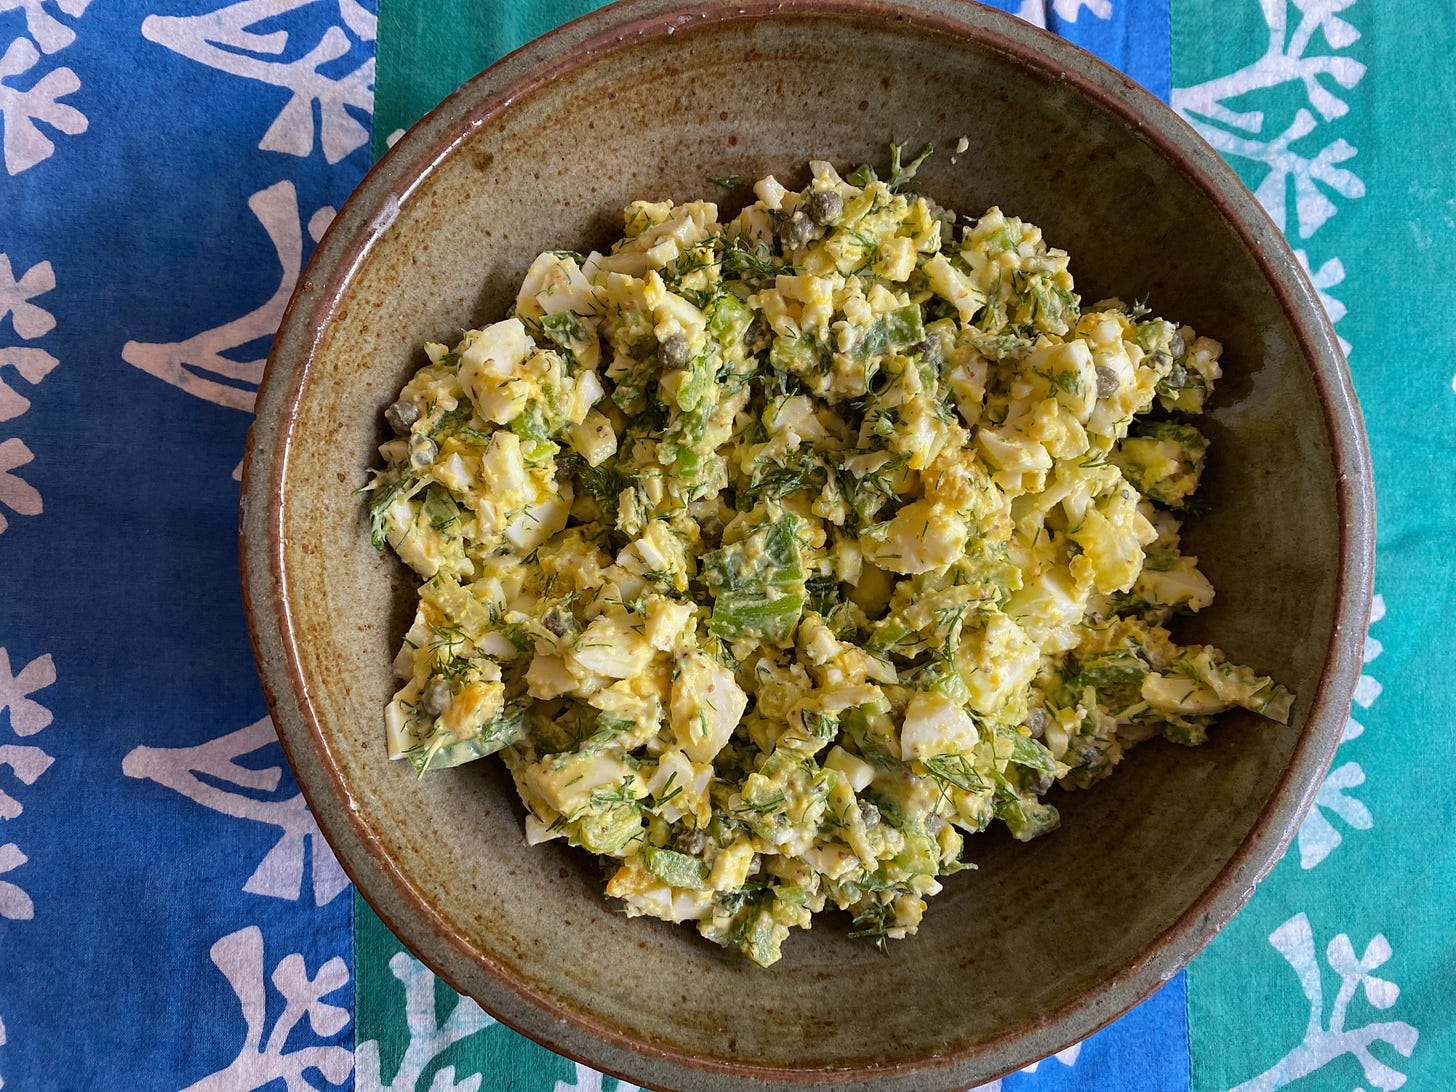 A ceramic bowl of egg salad on a blue and green striped placemat.